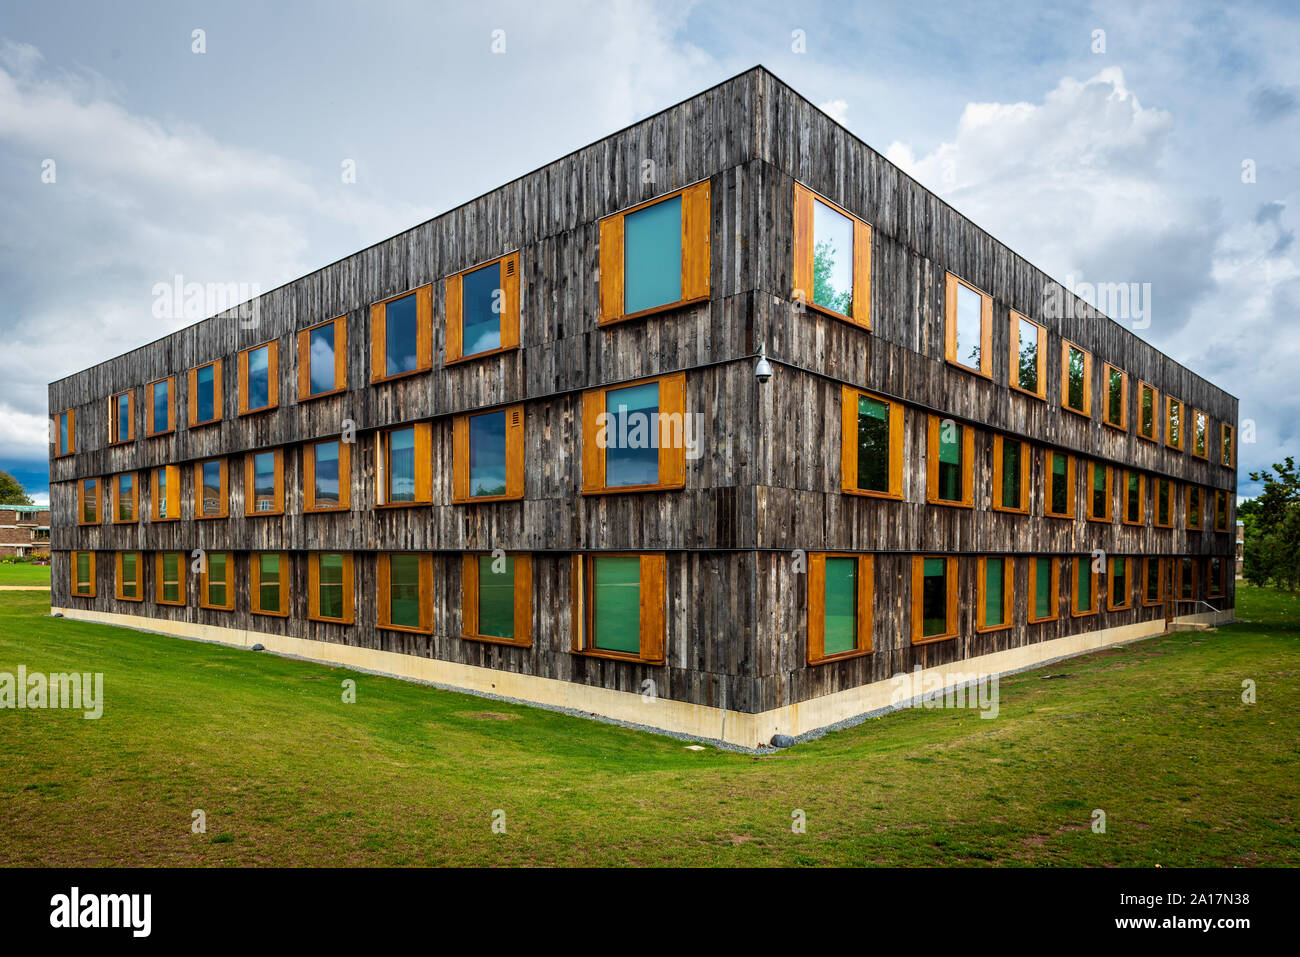 Cowan Court  on the campus of Churchill College University of Cambridge. Built 2016 it is a 68-room student residence, architects - 6a Architects. Stock Photo